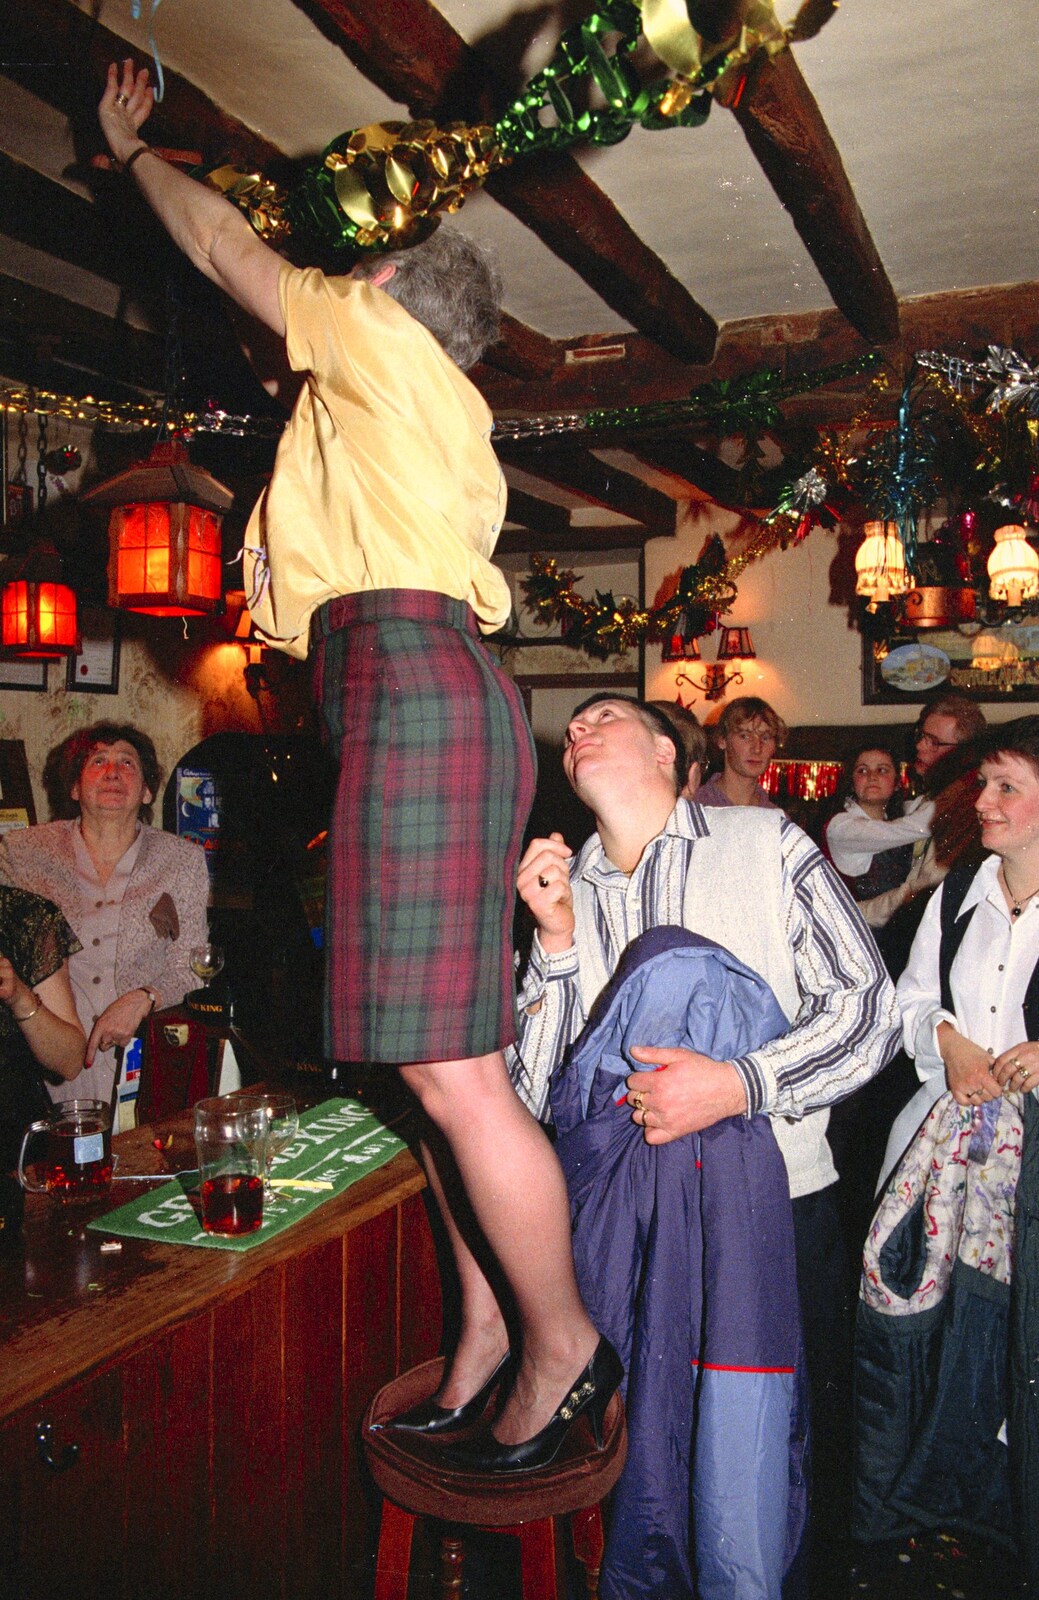 Spammy climbs on a stool from New Year's Eve at the Swan Inn, Brome, Suffolk - 31st December 1994